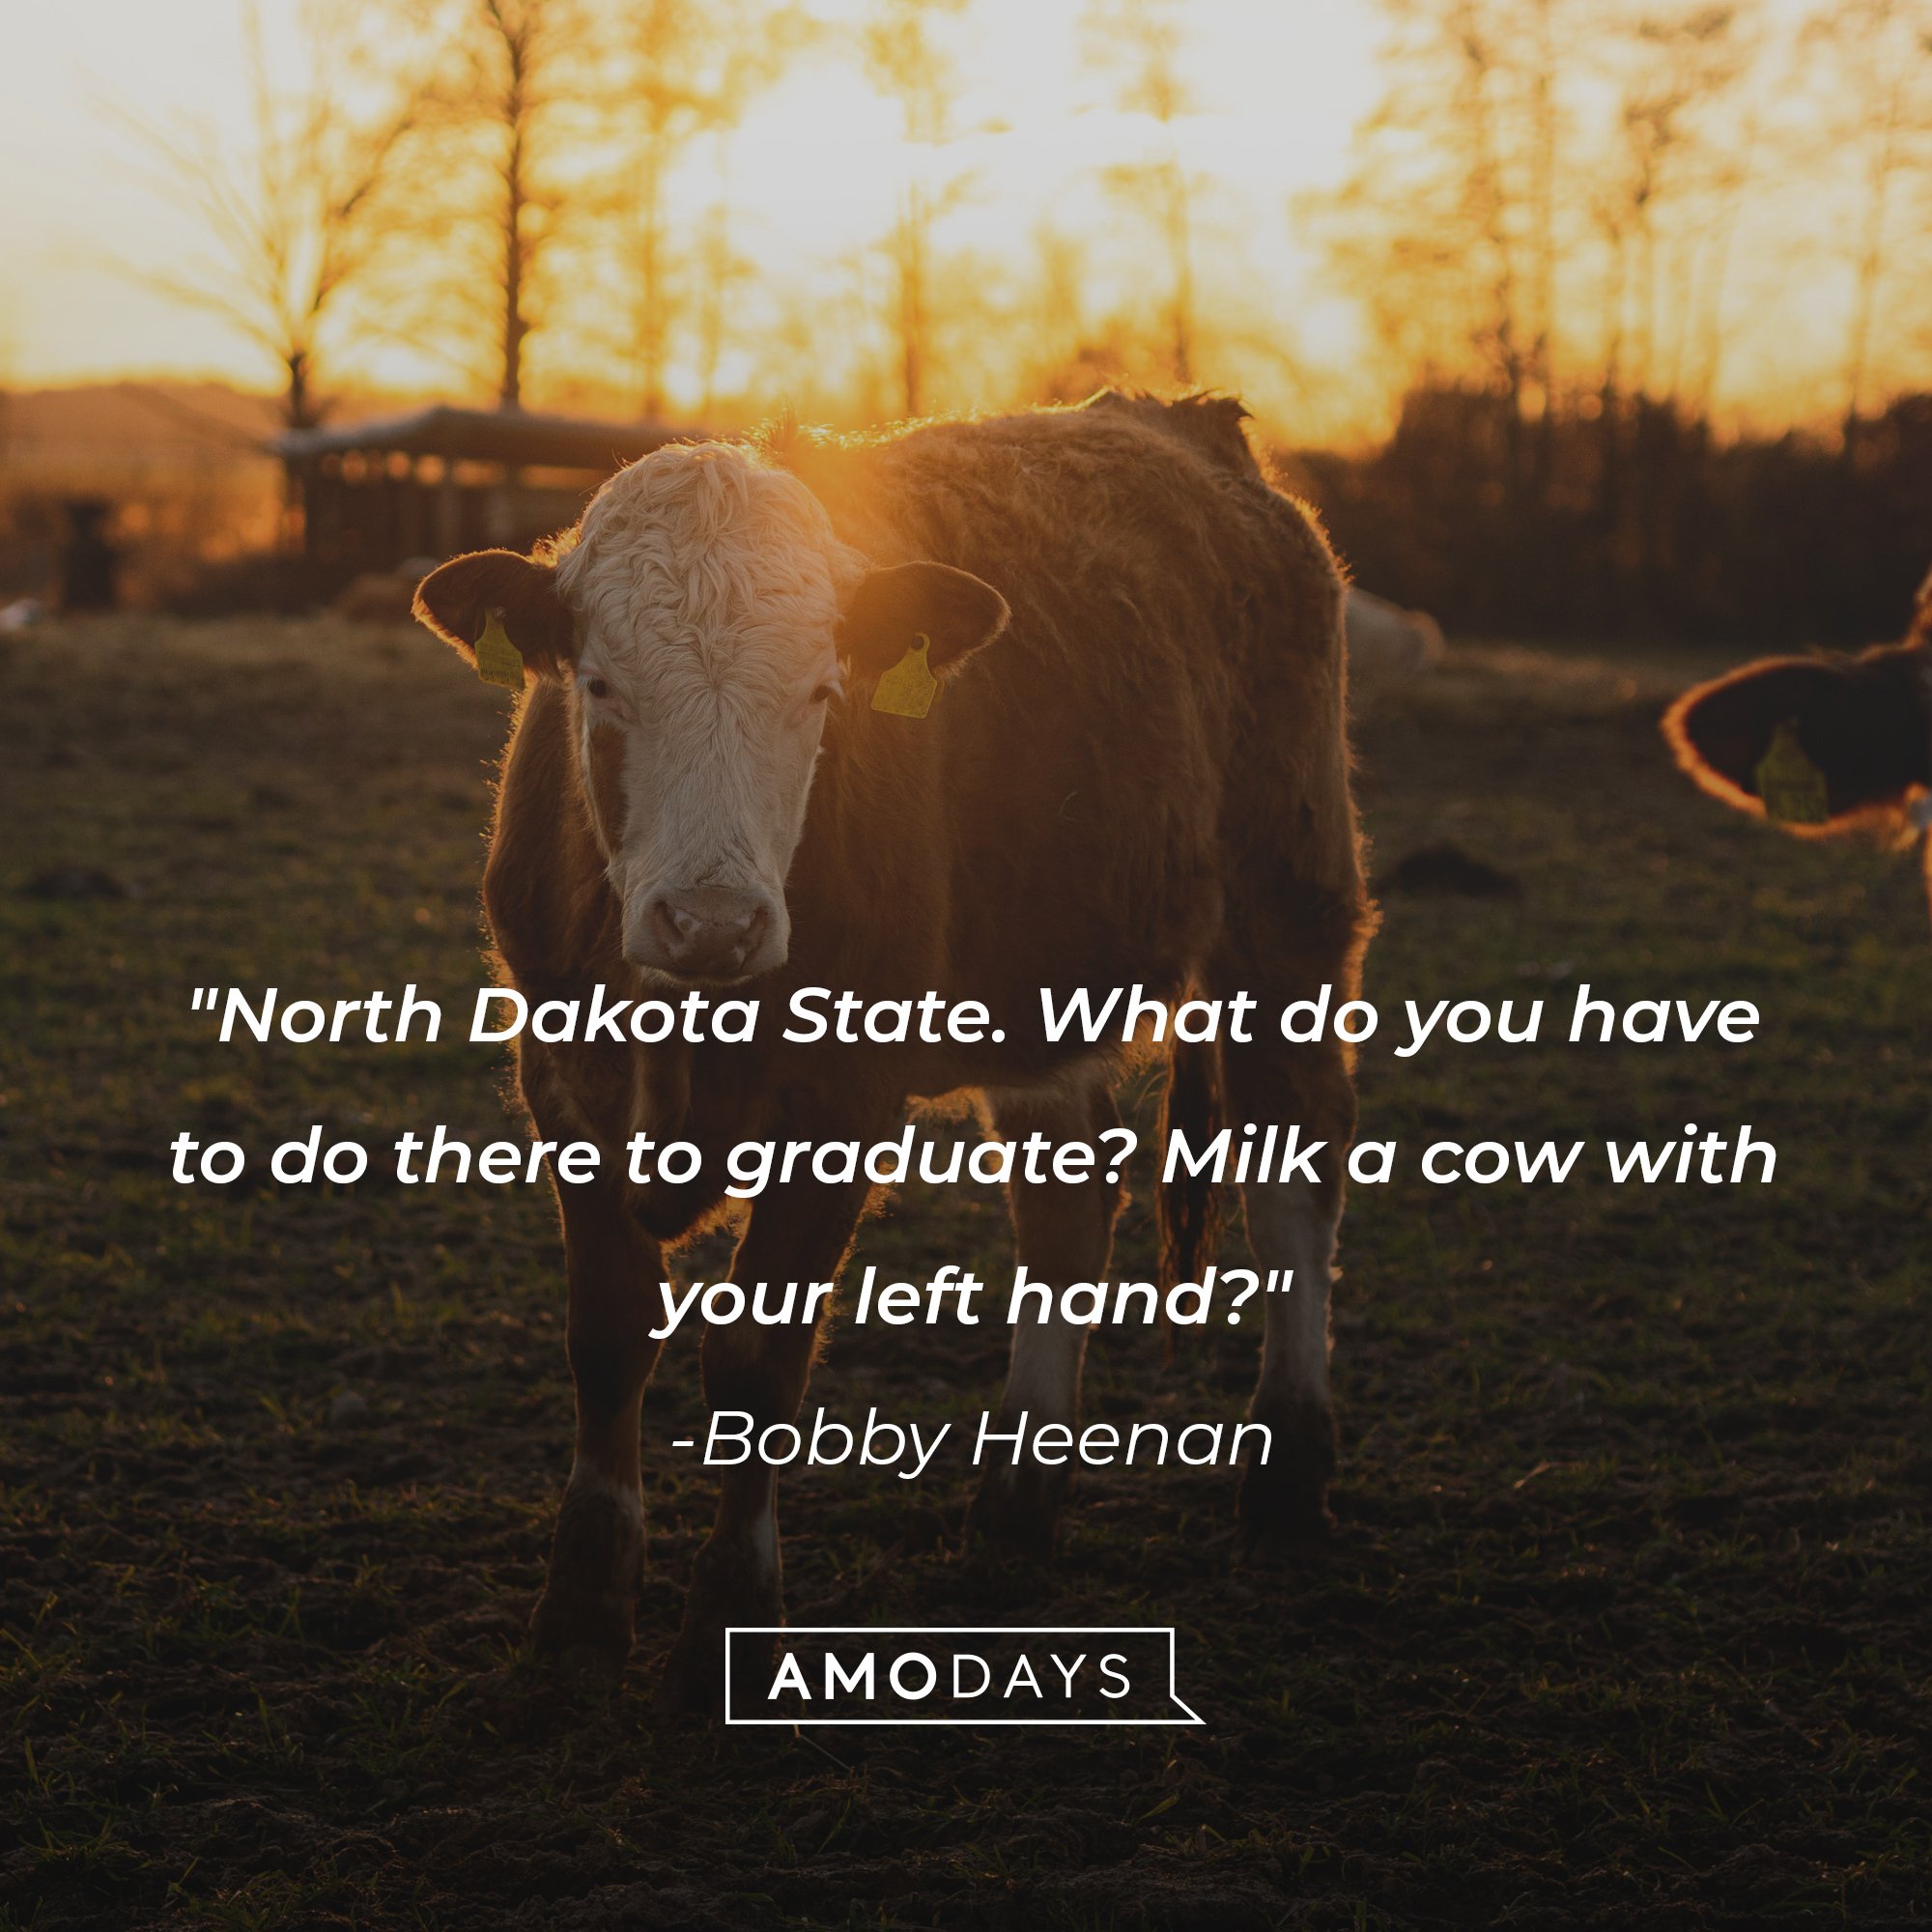 Bobby Heenan’s quote: "North Dakota State. What do you have to do there to graduate? Milk a cow with your left hand? | Image: AmoDays